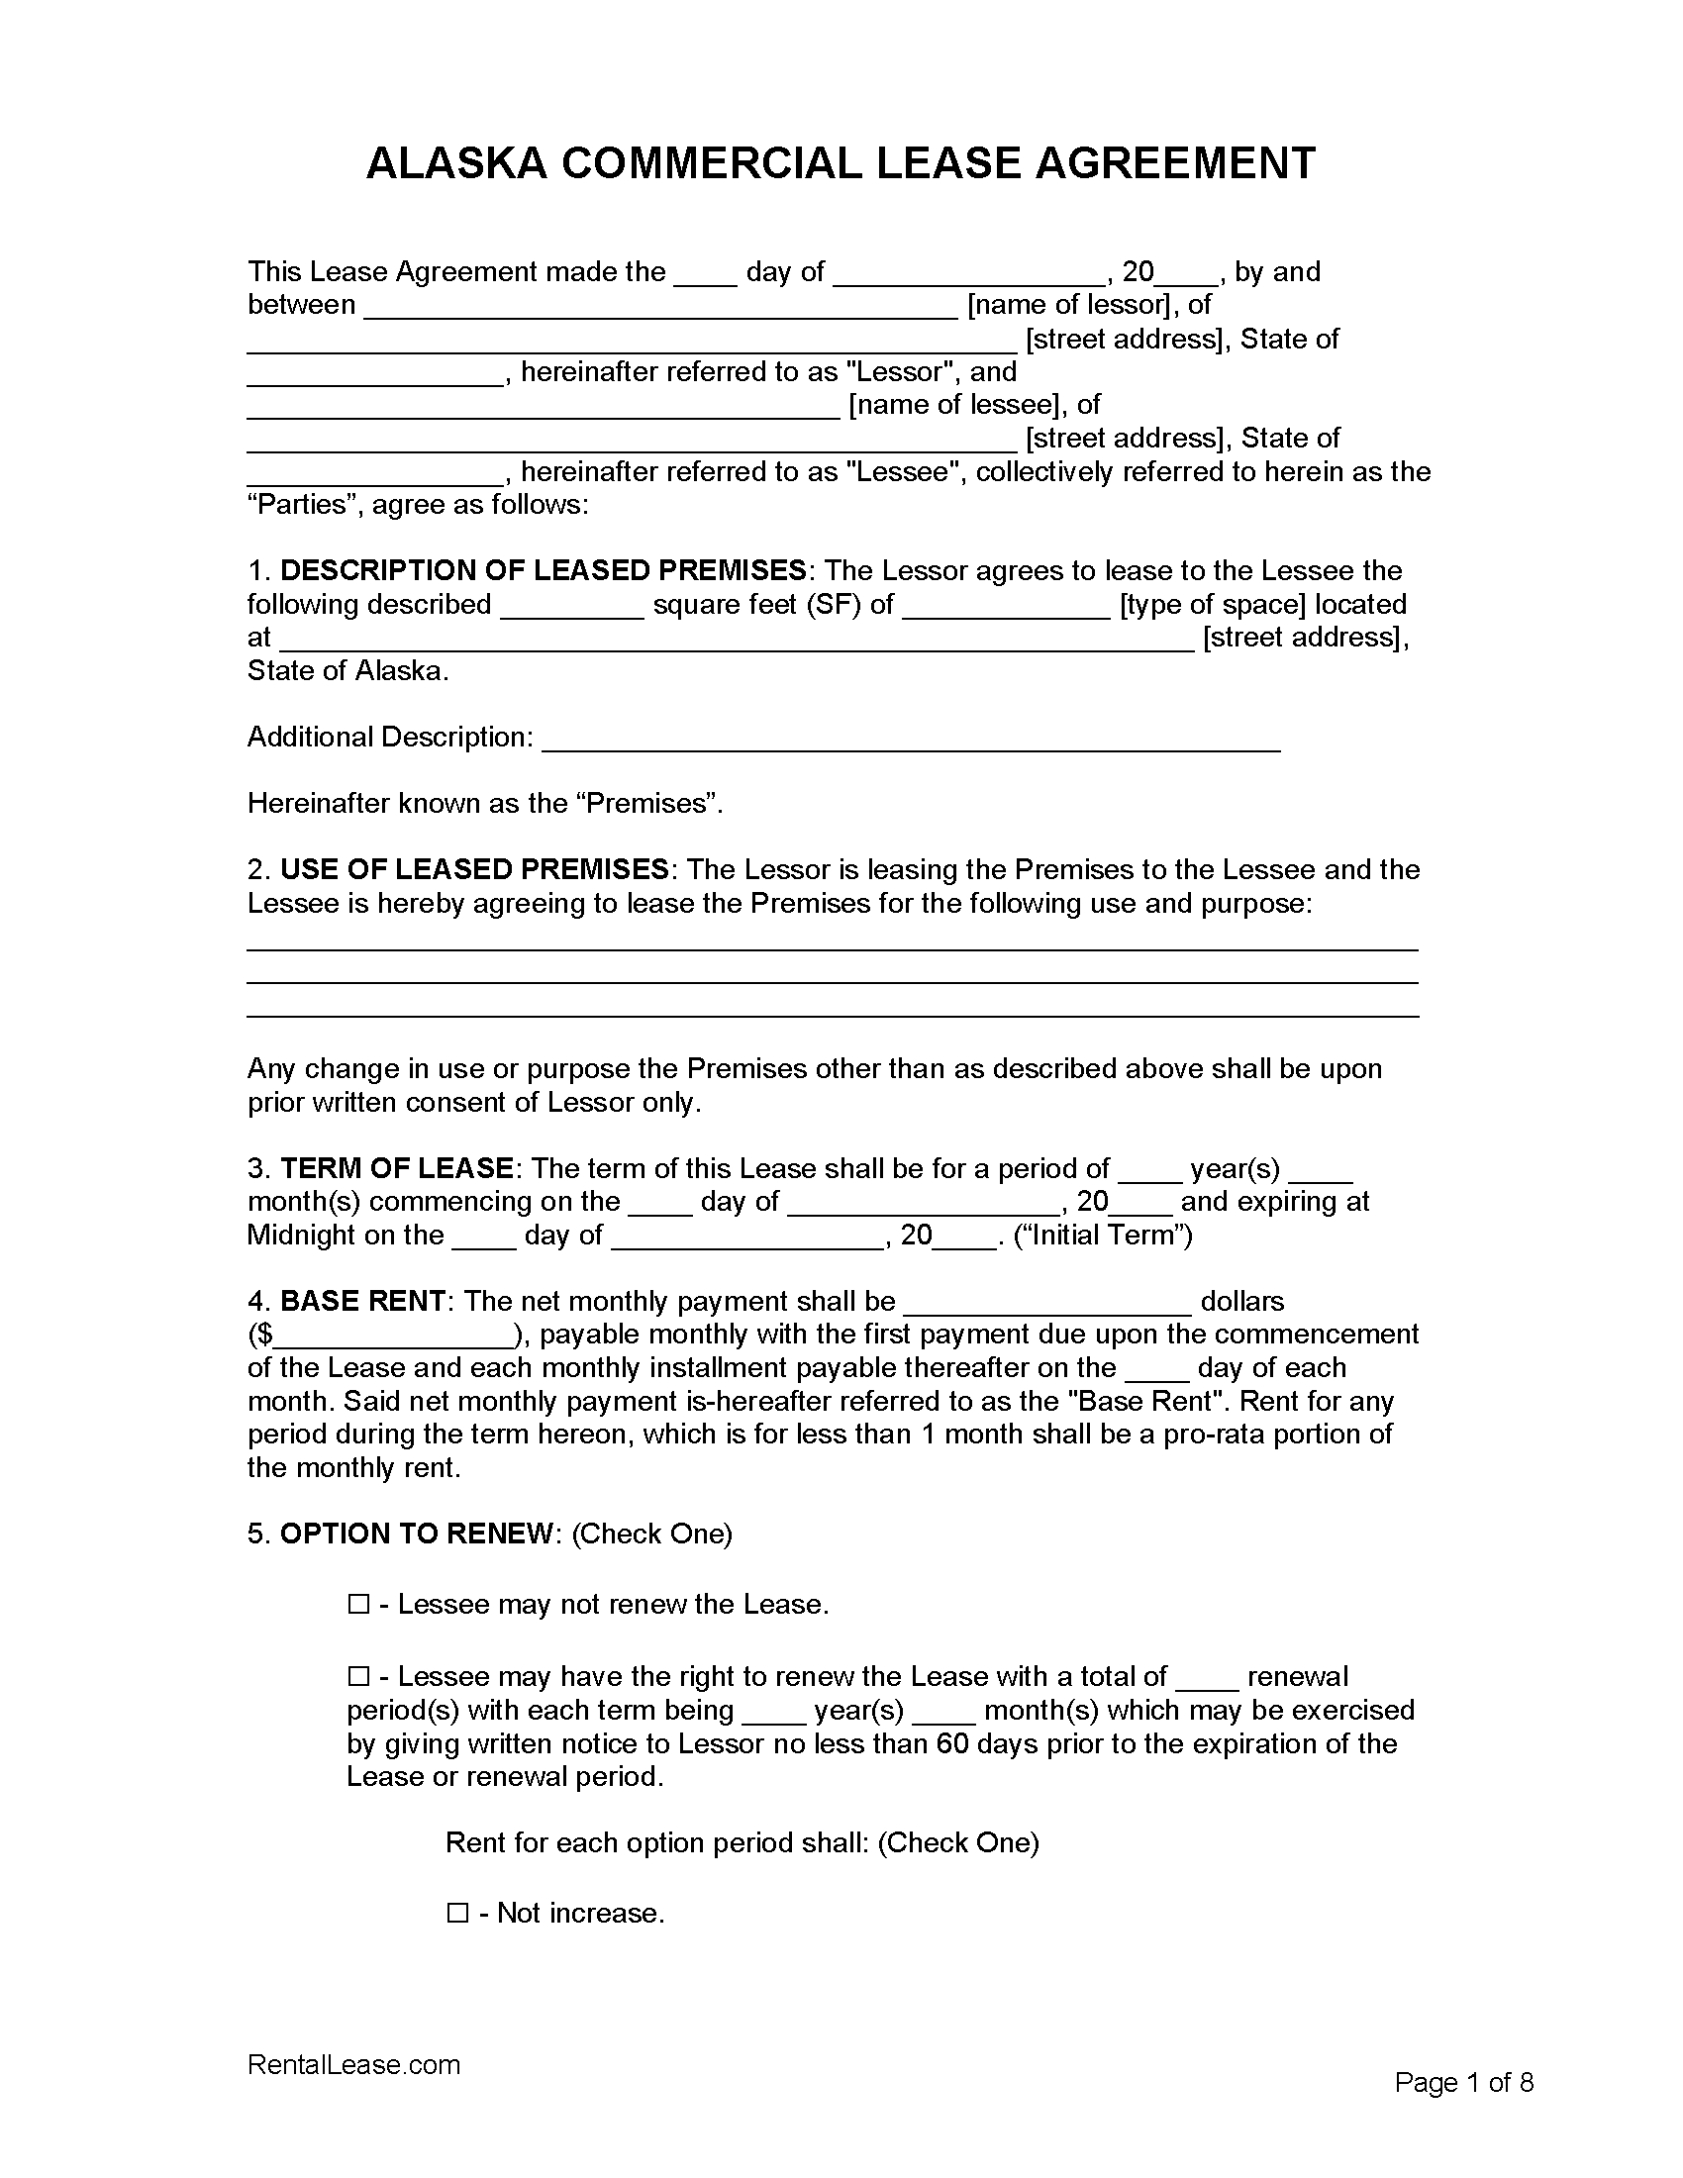 Free Alaska Commercial Lease Agreement Template | Pdf | Word throughout Business Lease Agreement Template Free